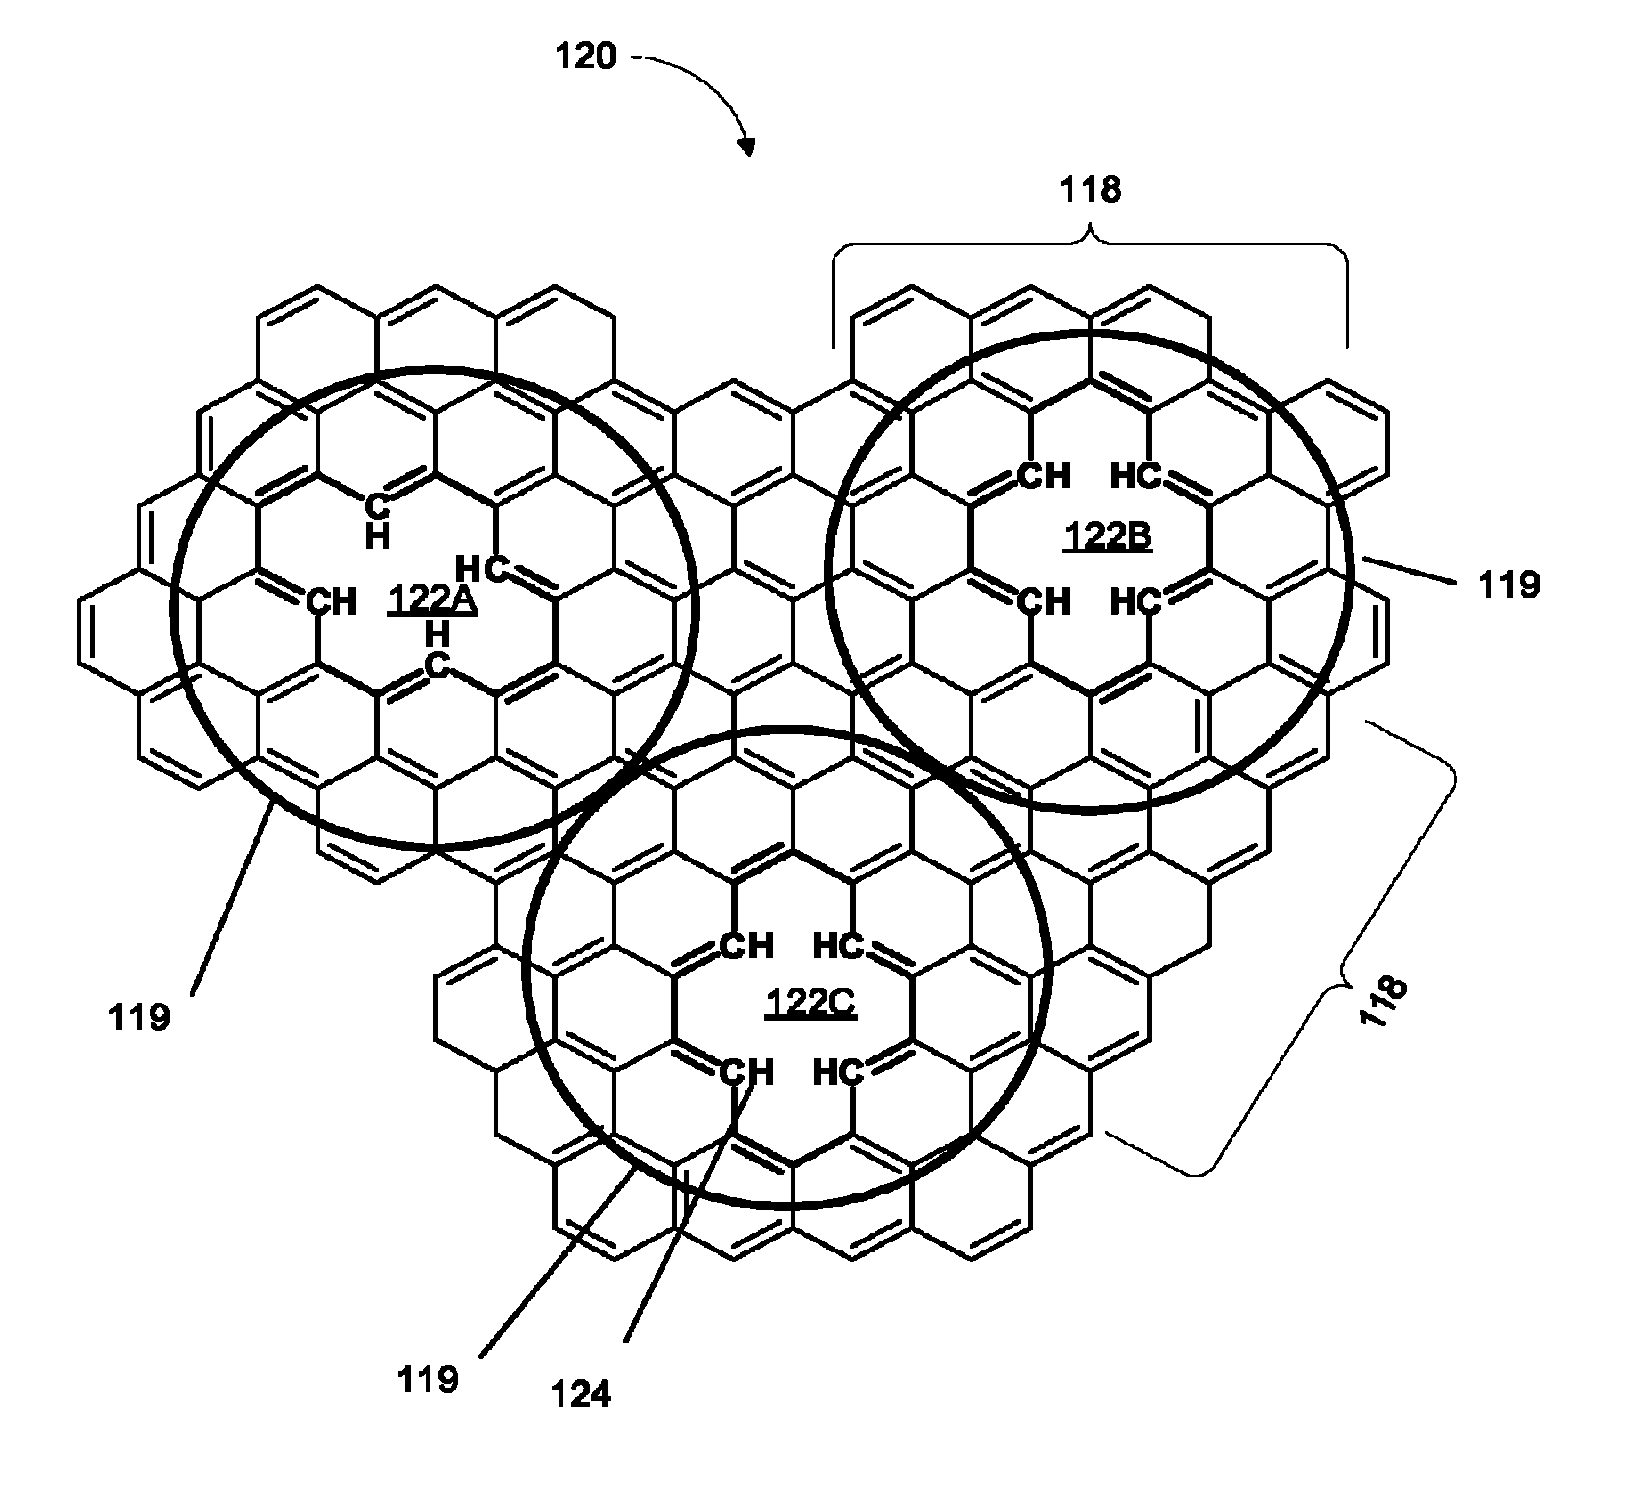 Graphene membrane with regular angstrom-scale pores